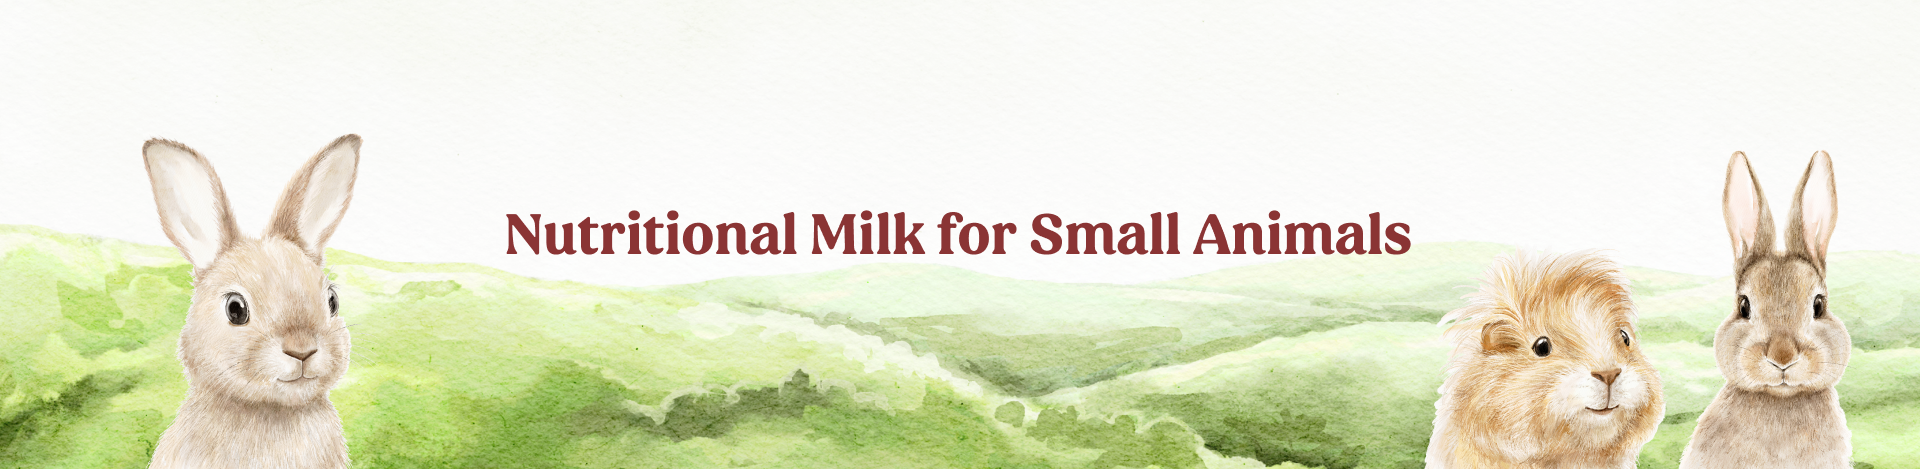 Nutritional Milk for Small Animals Banner